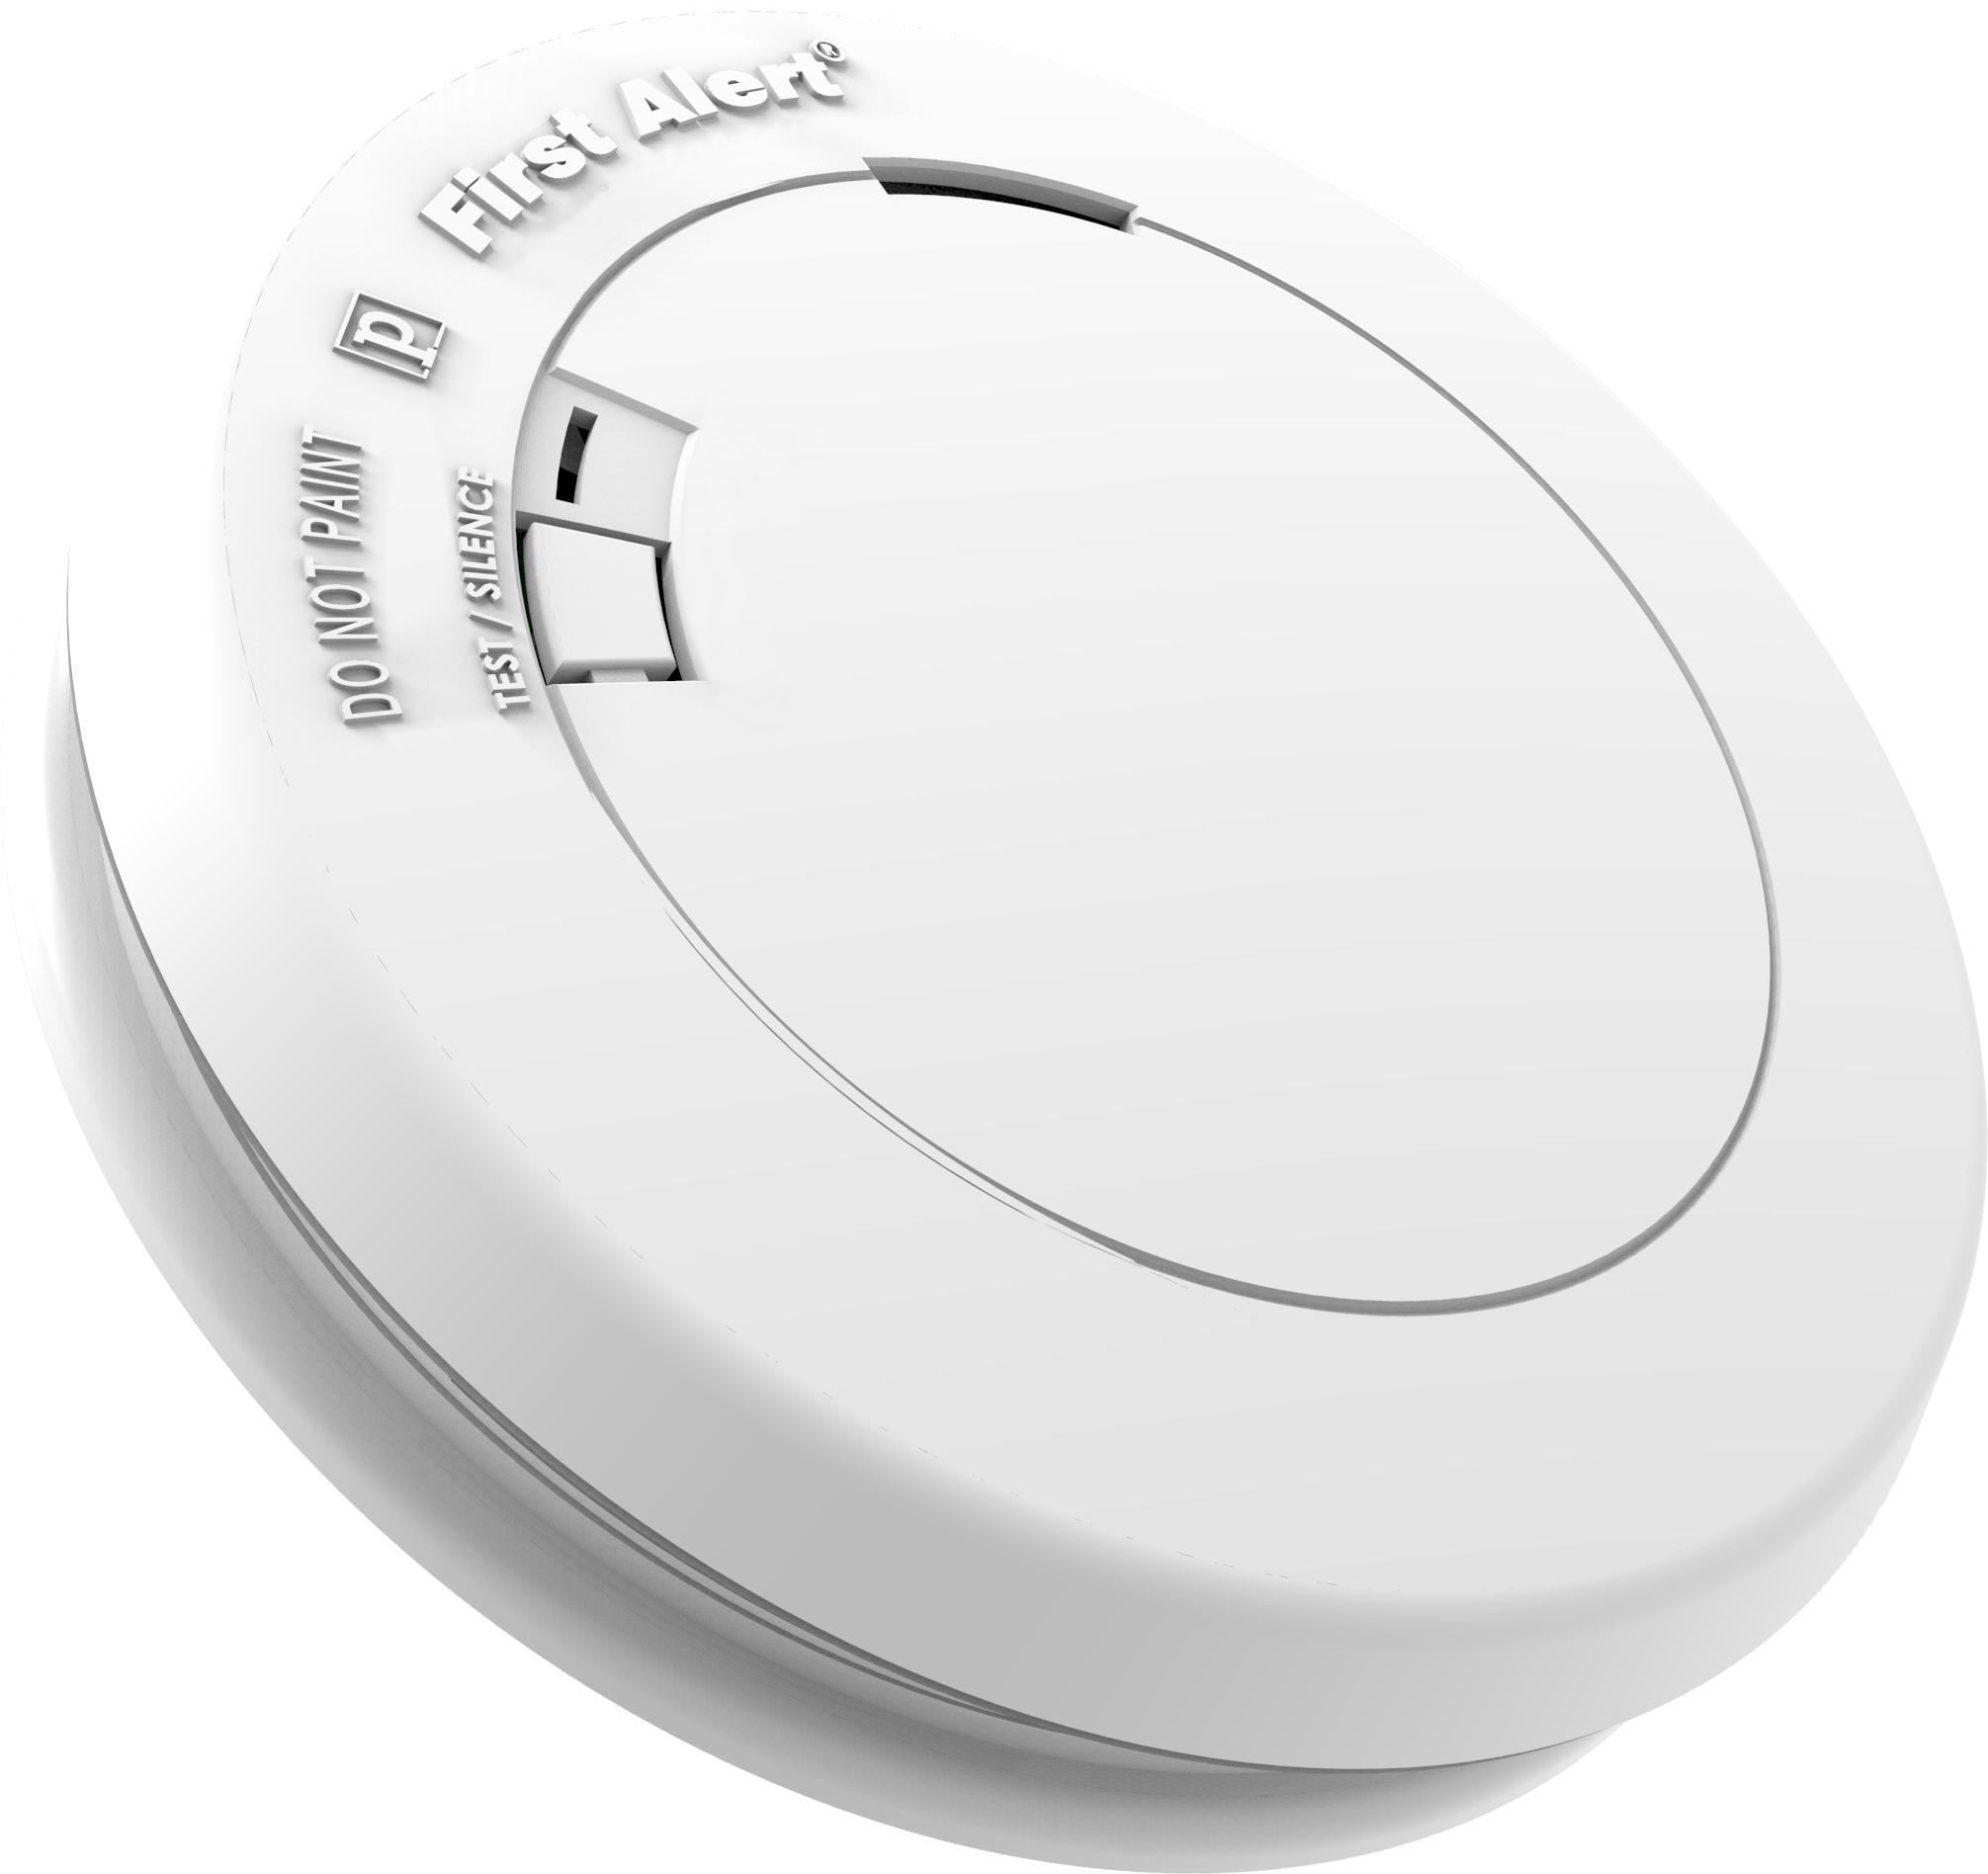 Low profile design. Tamperproof 10 year sealed lithium powercell photoelectric smoke alarm with silence feature. Tamper resistant - Locks alarm to mounting bracket to prevent removal of alarm.